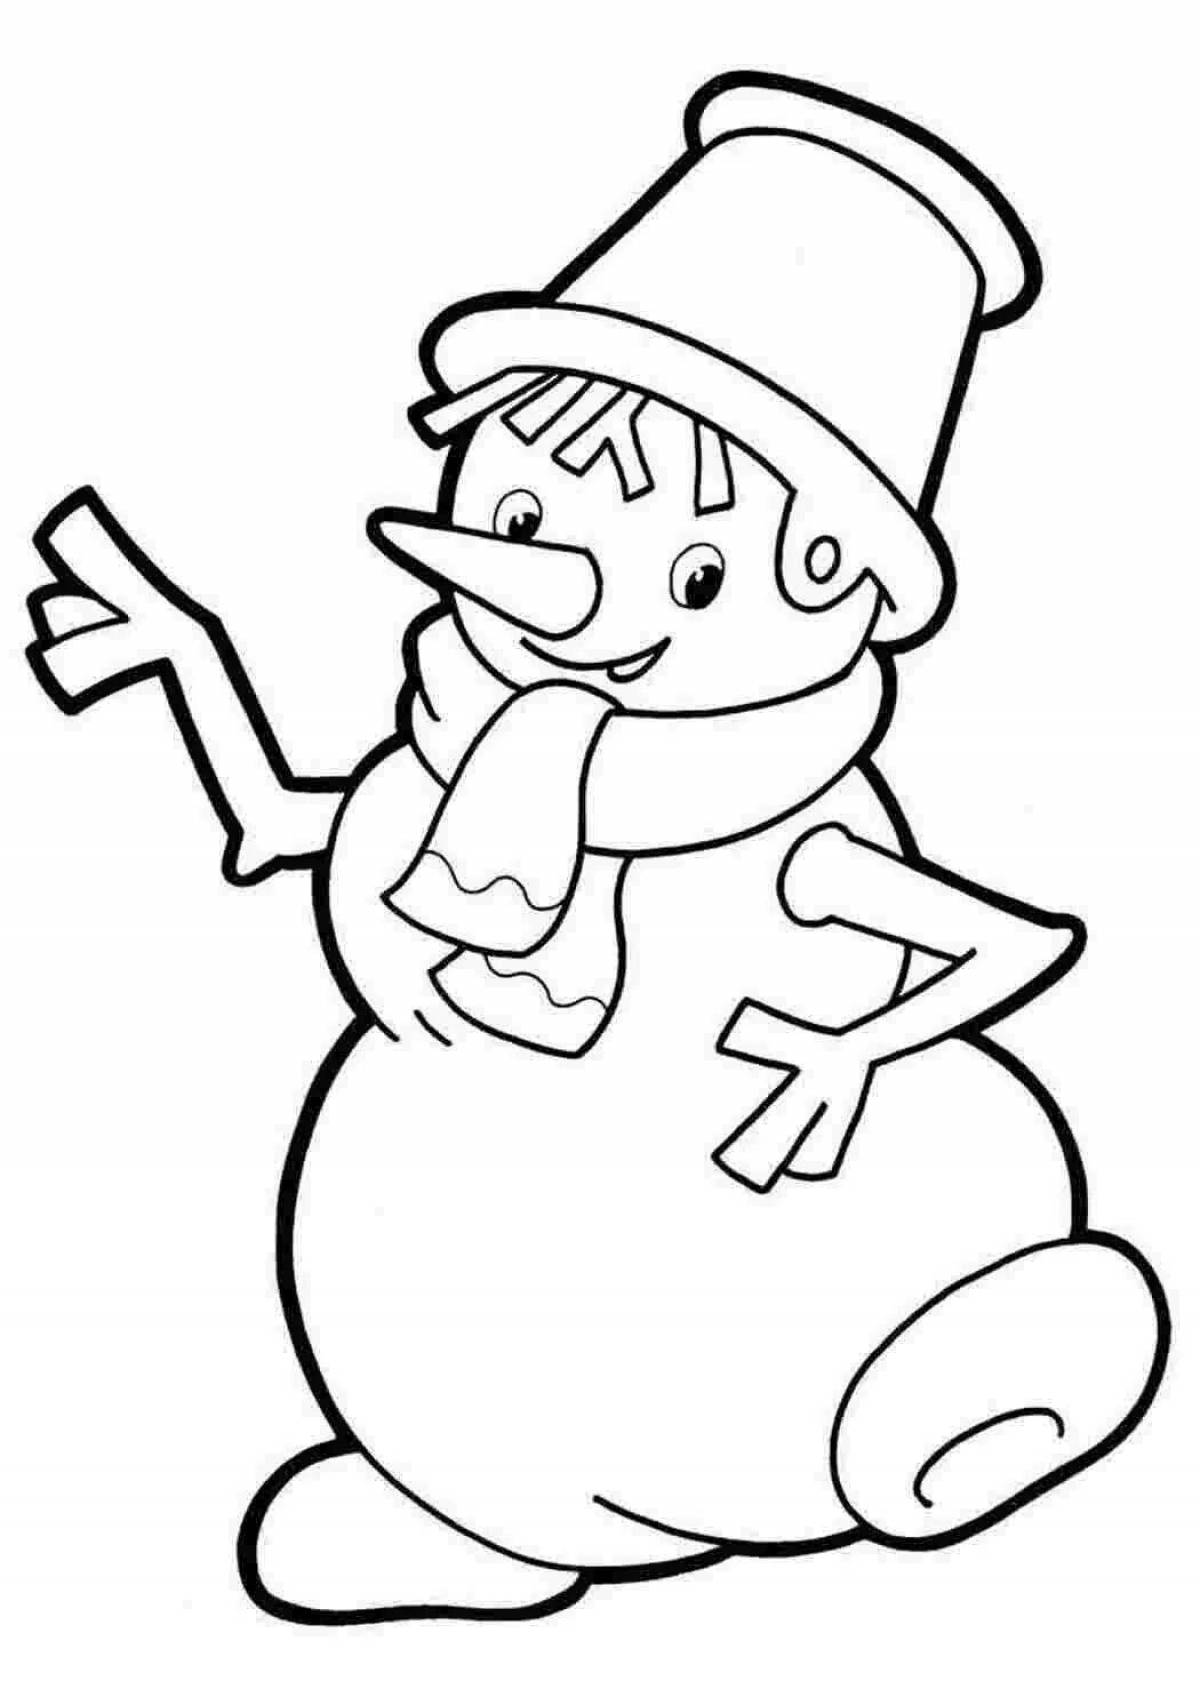 Glowing snowman coloring book for kids 5 6